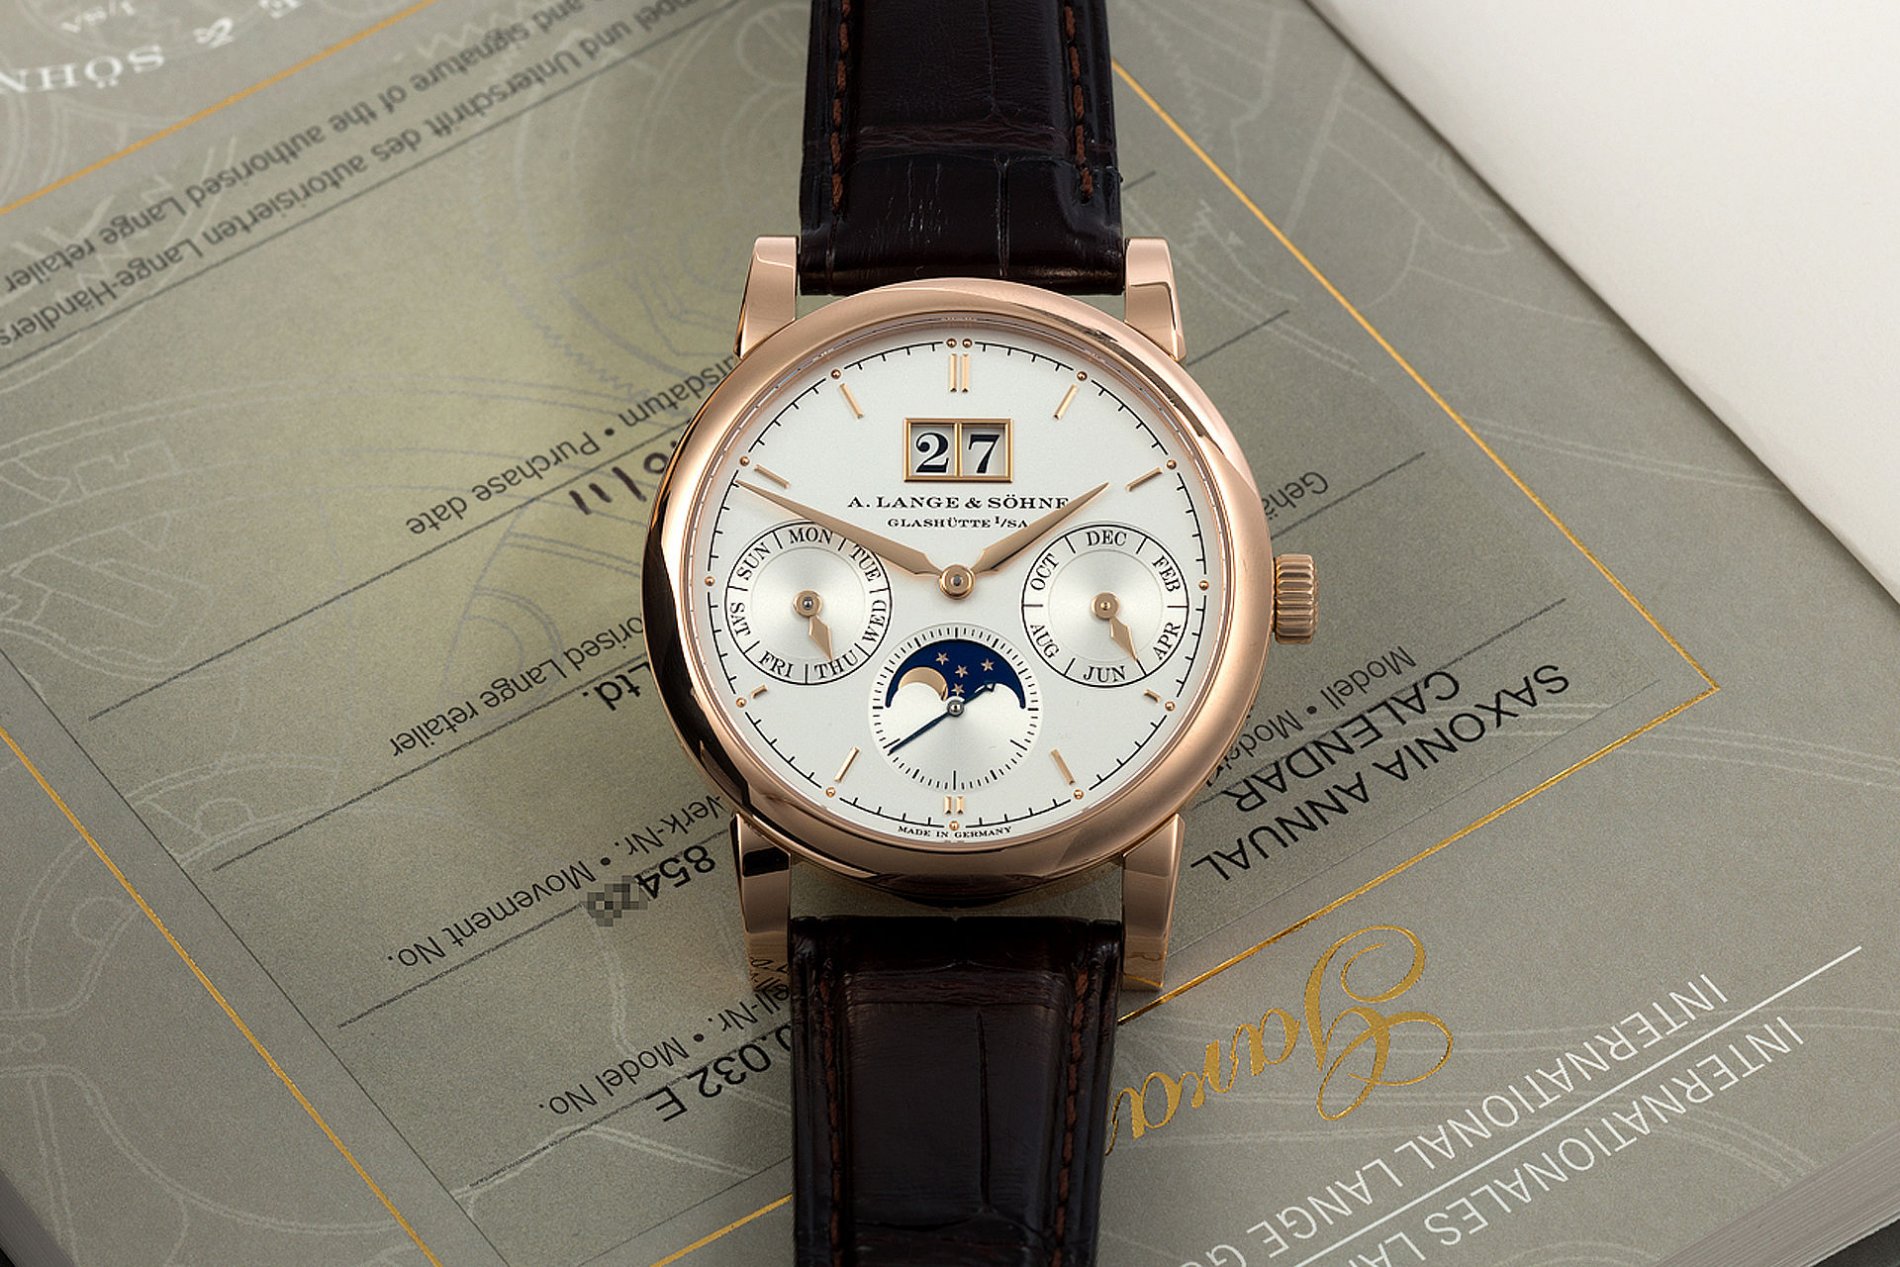   a-lange-and-sohne-saxonia-annual-calendar-385mm-18ct-rose-gold-ref-330032e-year-2011-199.jpeg